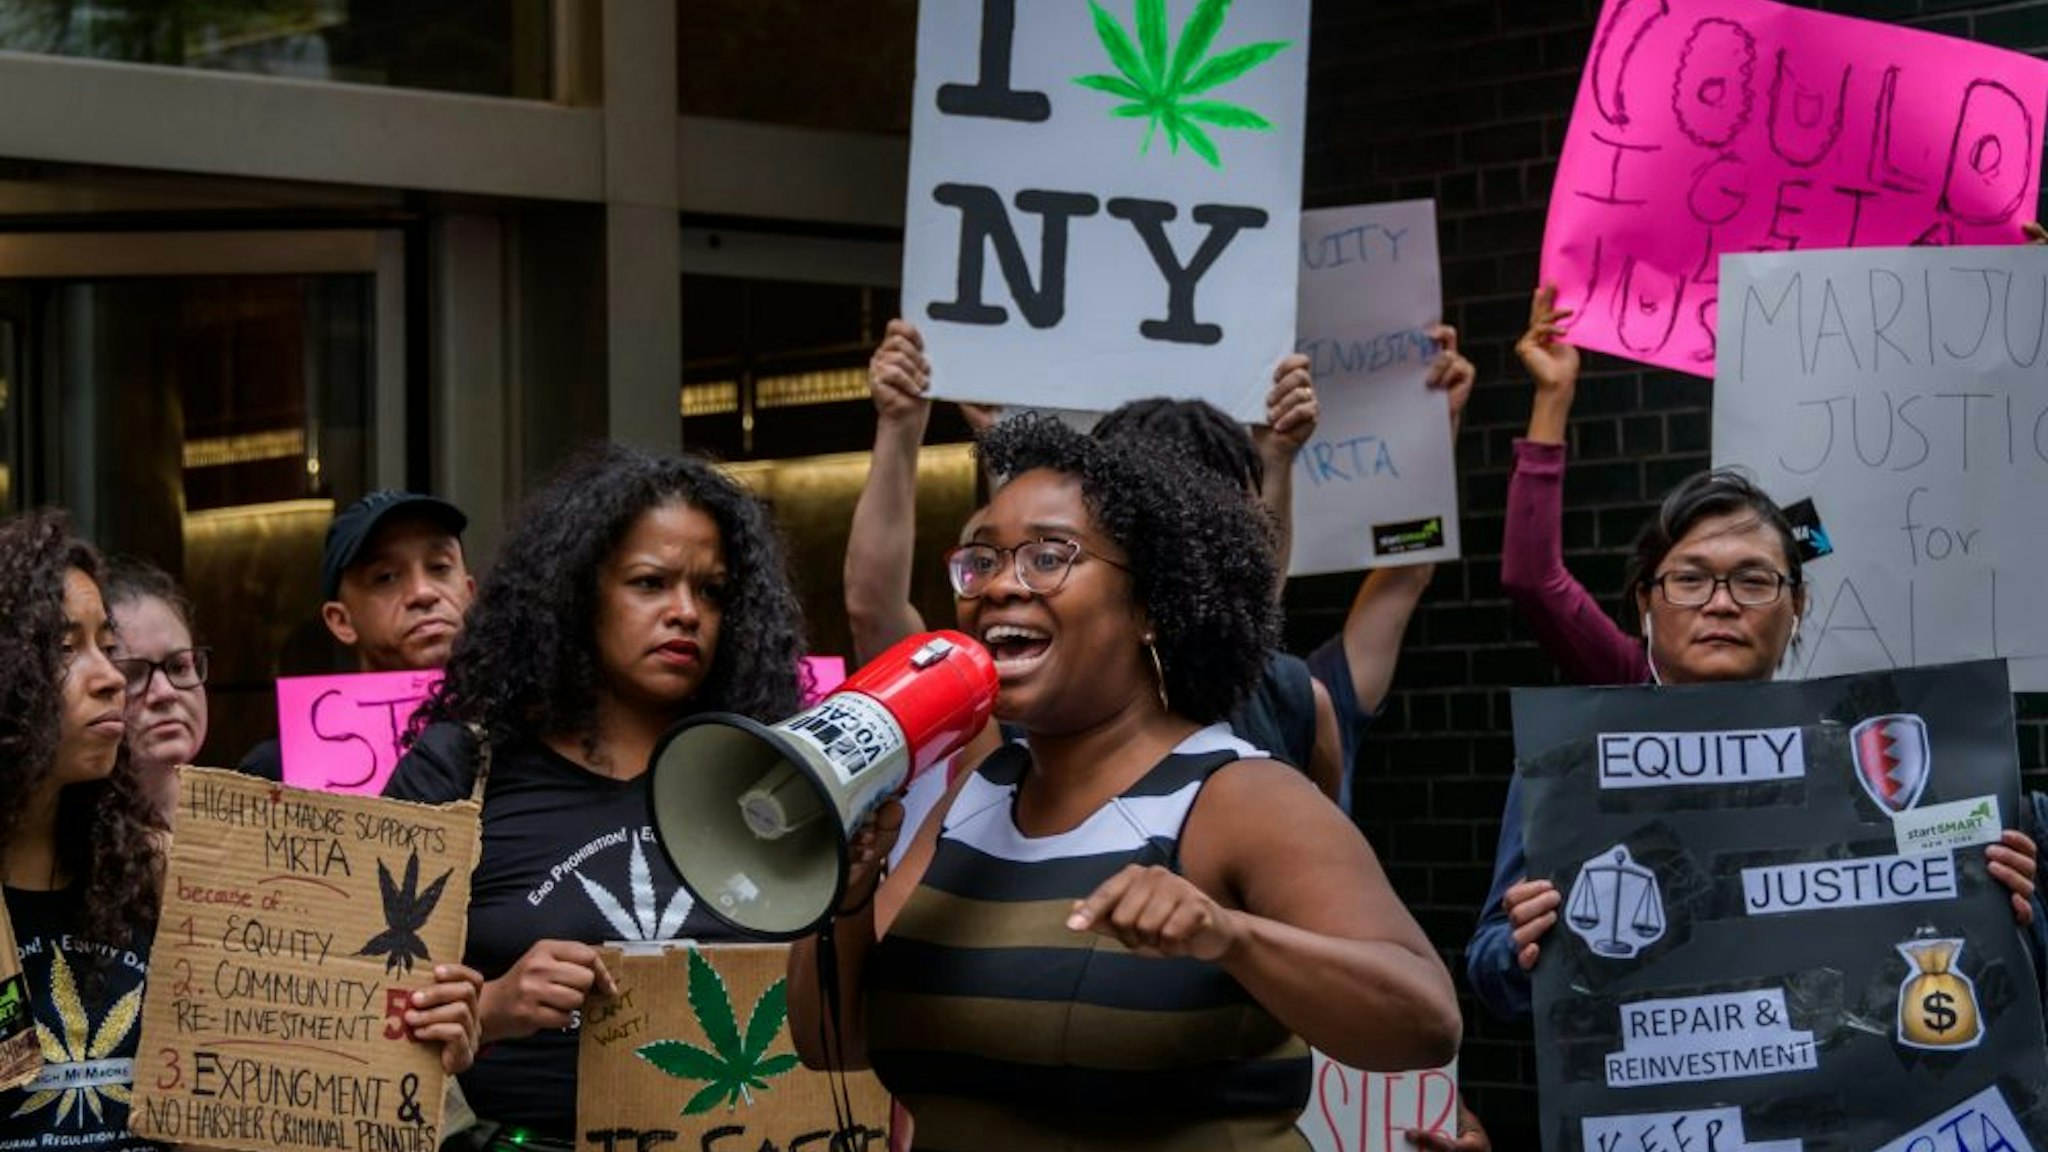 NEW YORK GOVERNOR'S OFFICE IN MANHATTAND, NEW YORK, UNITED STATES - 2019/06/16: Kassandra Frederique is New York State Director at the Drug Policy Alliance (DPA) - Marijauna rally outside New York Governor's office in Manhattan calling on Governor Andrew Cuomo, Senate Majority Leader Andrea Stewart-Cousins, and Assembly Speaker Carl Heastie to enact the Marijuana Regulation and Taxation Act (S.1527B/A.1617B), known as the MRTA.